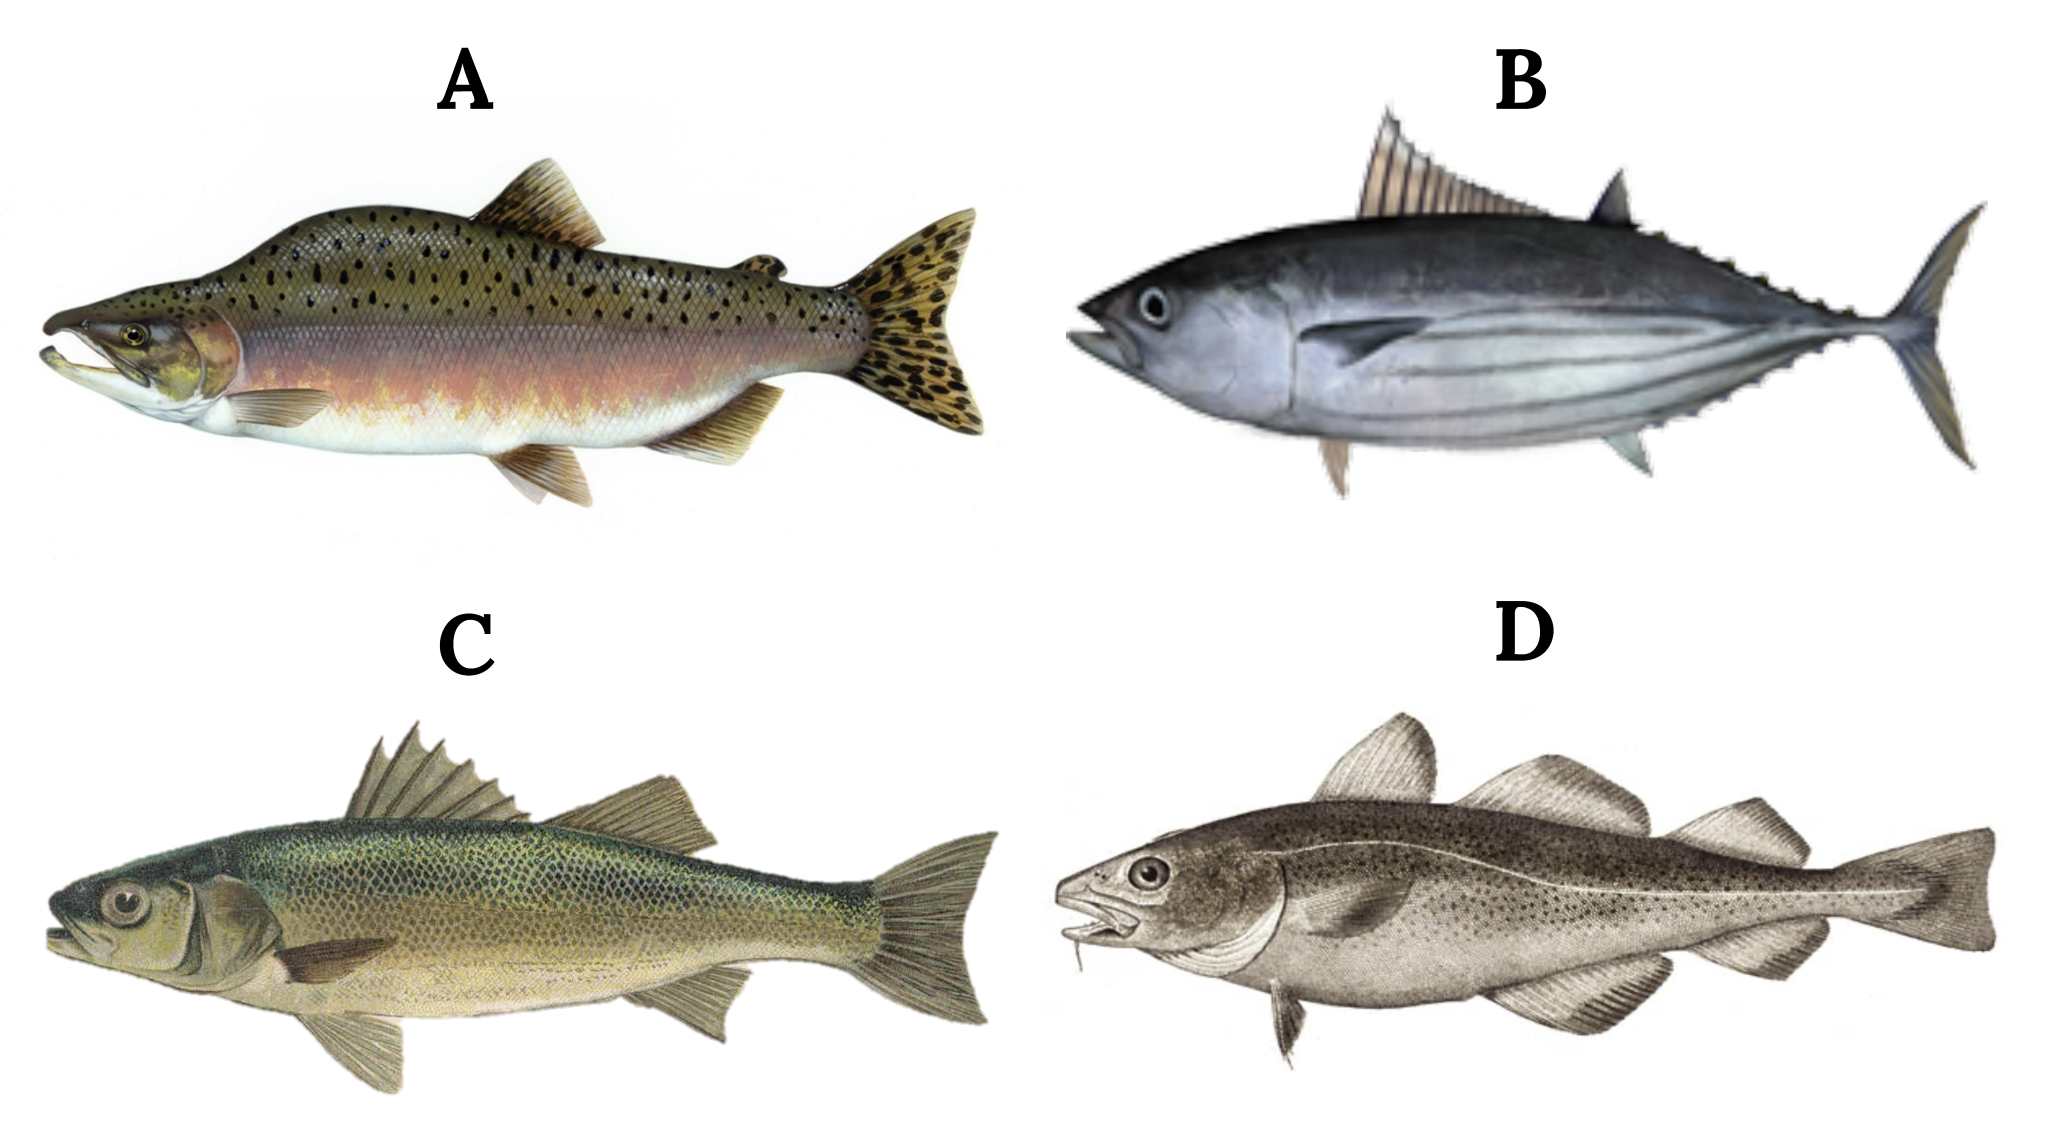 Pink salmon (bright greenish-blue on top and silvery on its sides), skipjack tuna (streamlined body that is mostly without scales; their backs are dark purple-blue and their lower sides and bellies are silver with four to six dark bands), European sea bass (silvery gray to bluish on the back, silvery on the sides, and white on the belly; elongated body, larger scales, and a stripe down their sides), and Atlantic Cod (heavy-bodied with a large head, blunt snout, and a distinct barbel under the lower jaw).